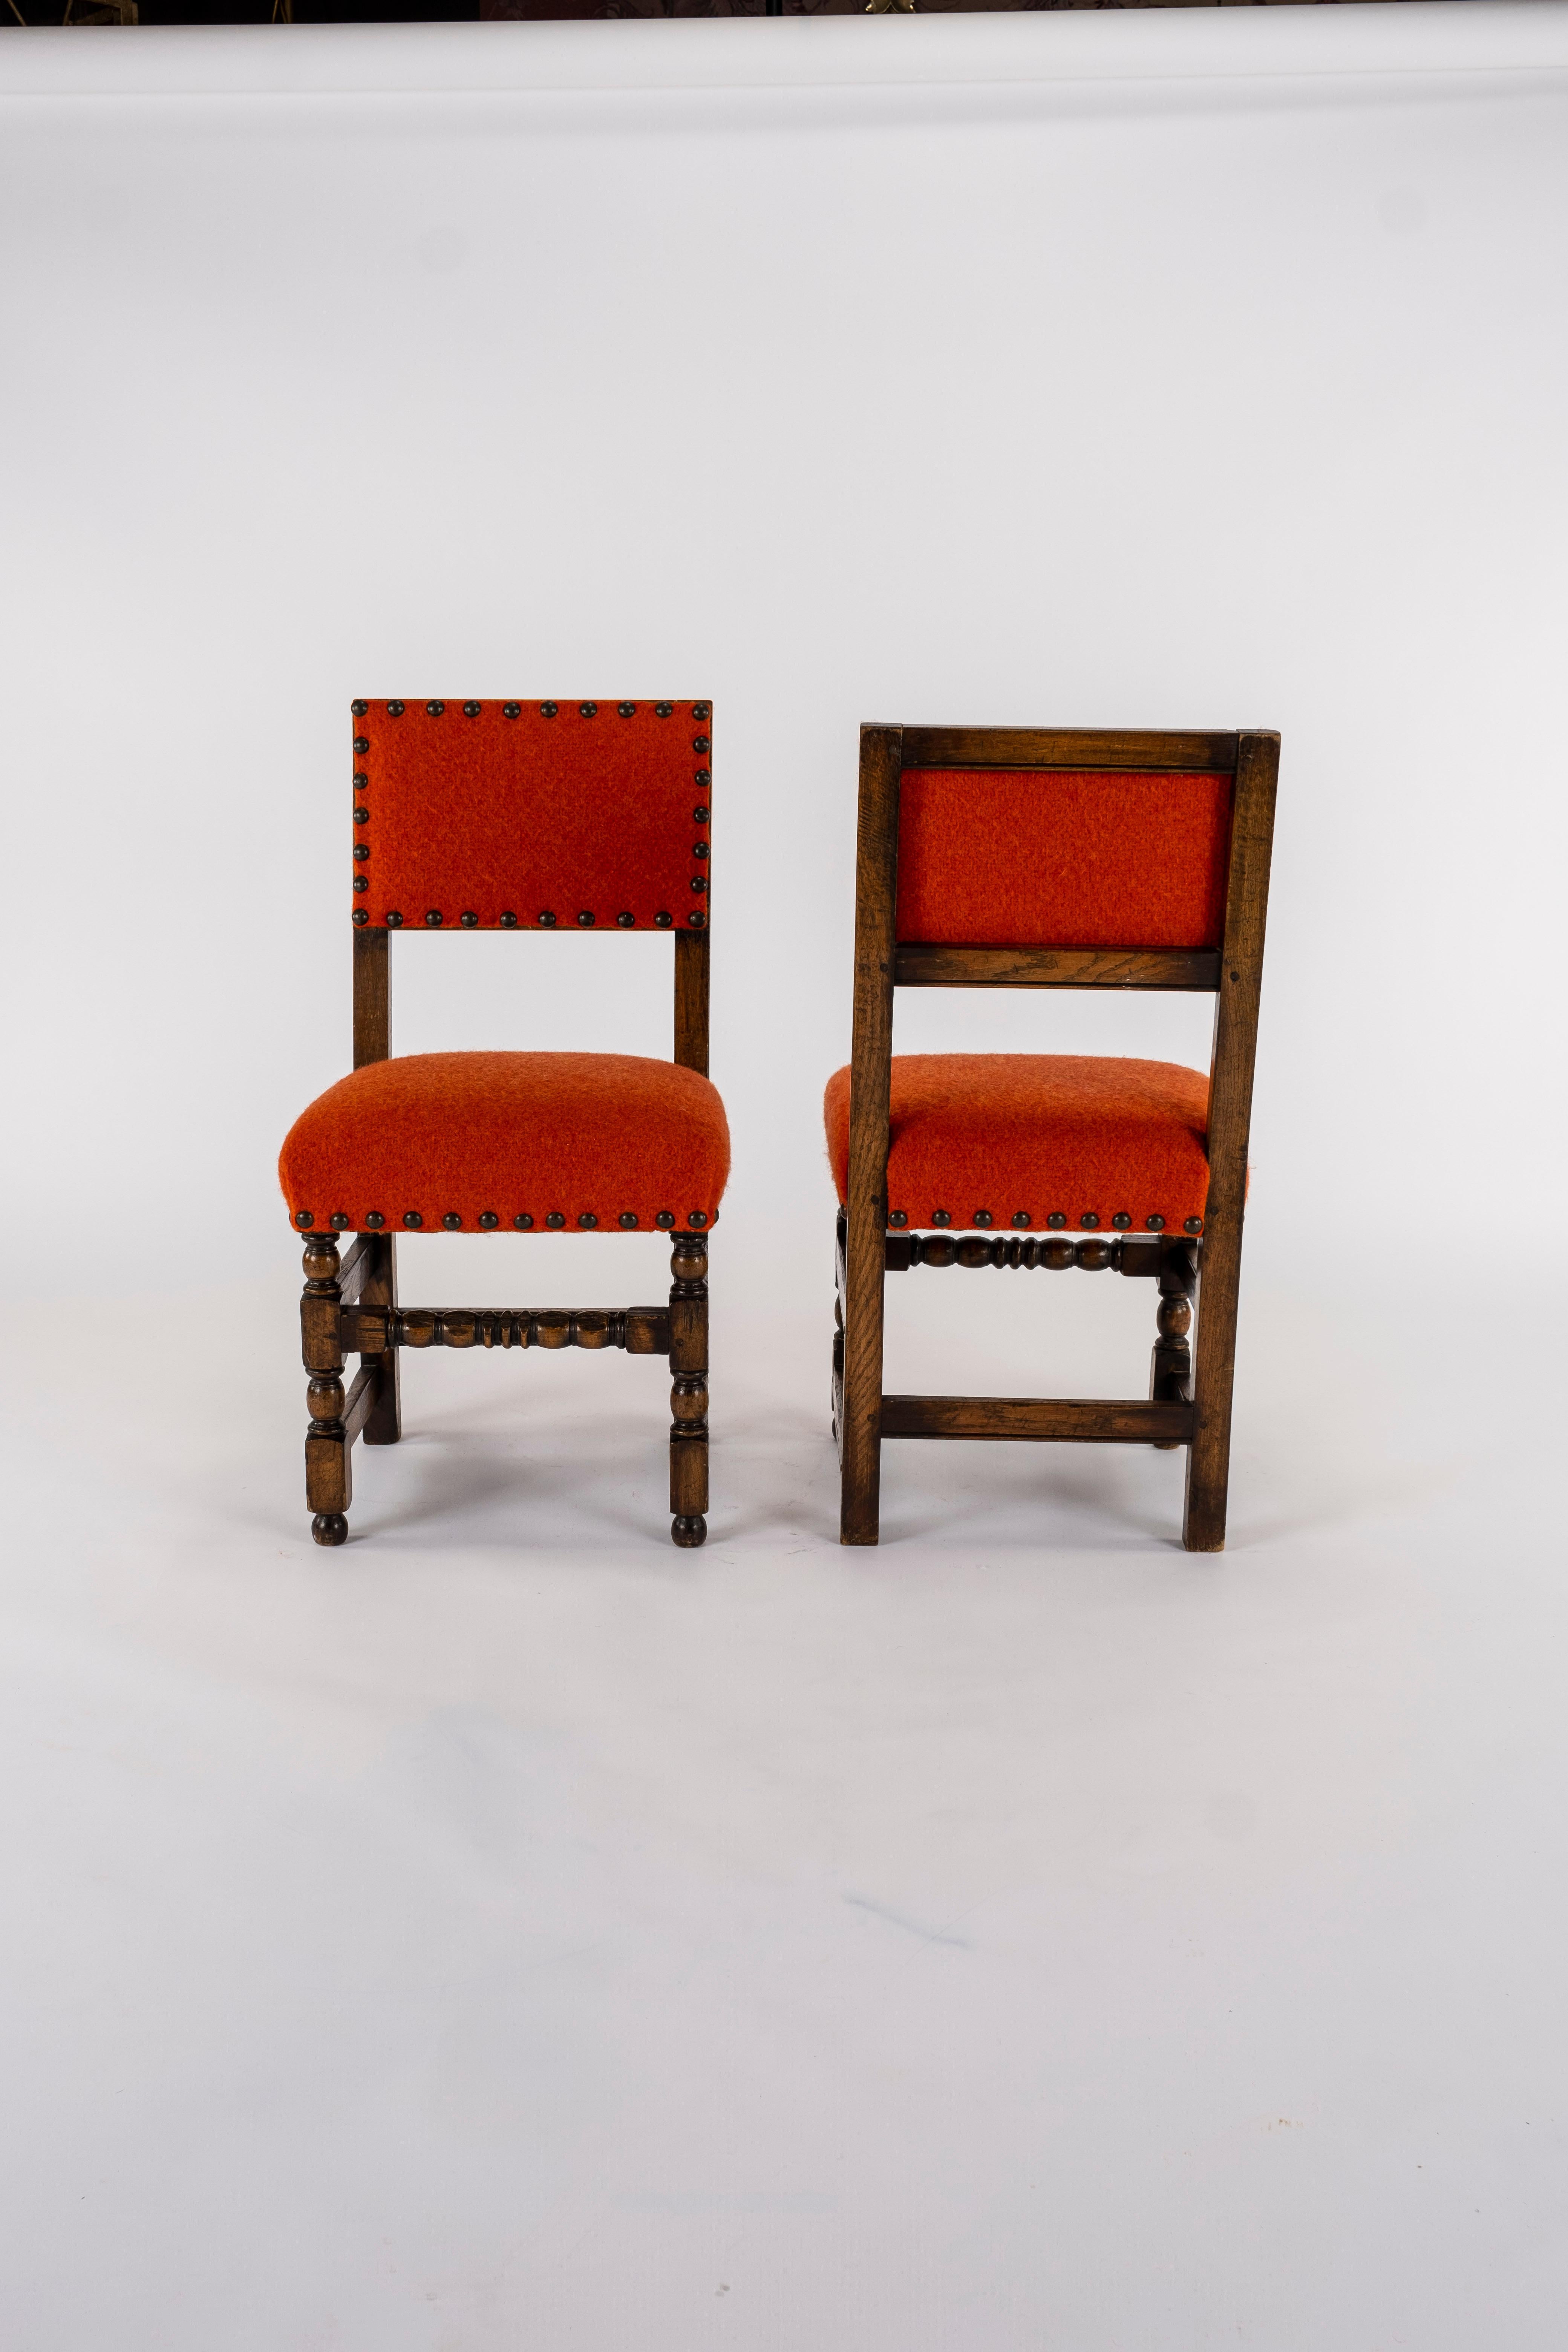 Hand-Carved Pair of 19th Century Orange Red Louis XIII Style Walnut Chairs